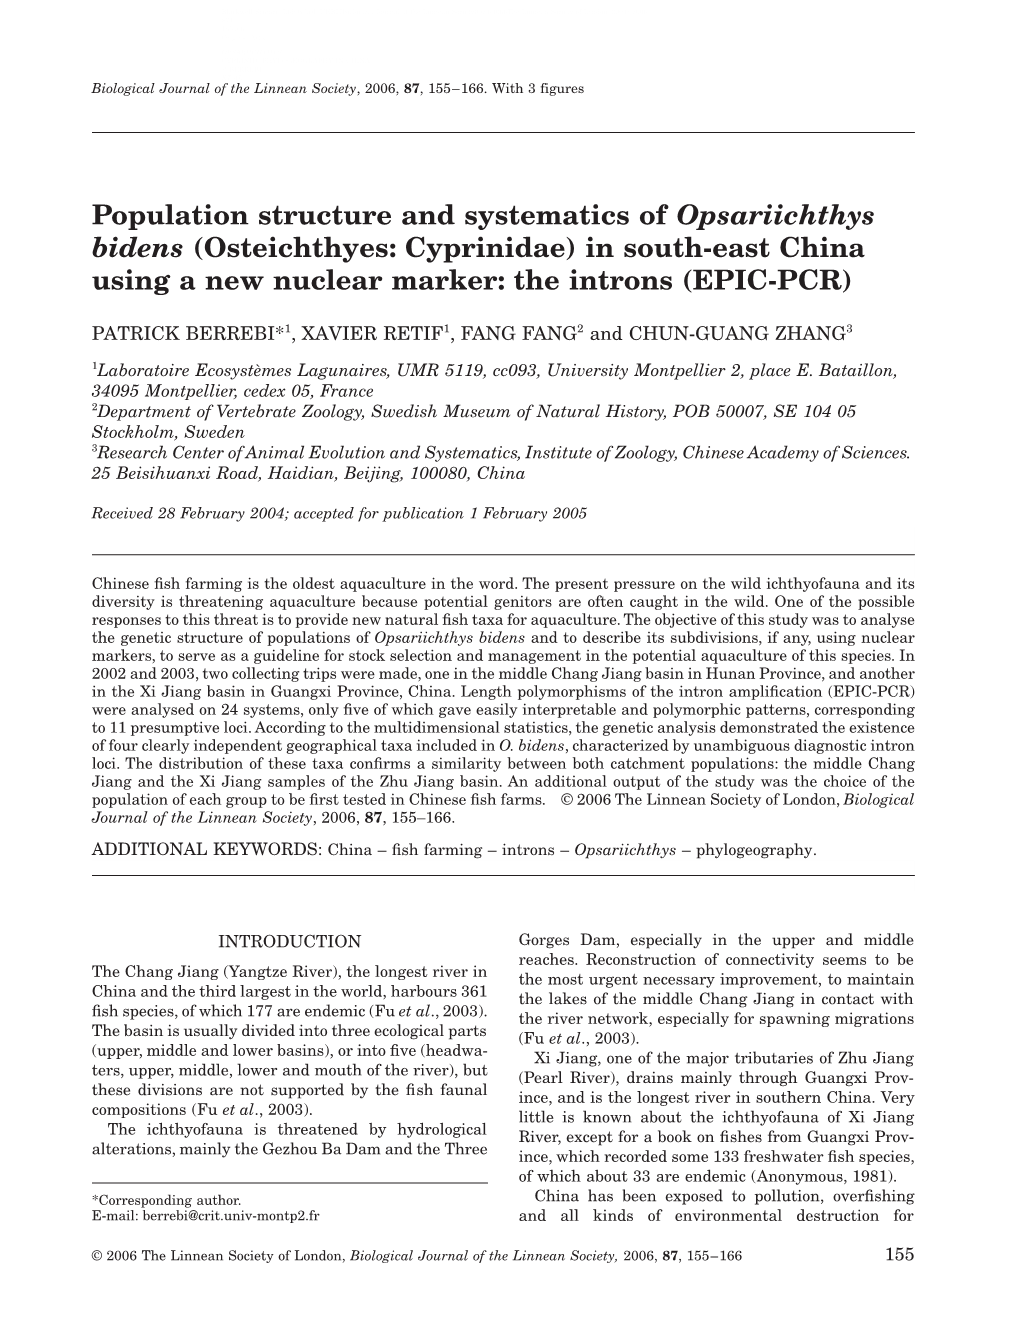 Population Structure and Systematics of Opsariichthys Bidens (Osteichthyes: Cyprinidae) in South-East China Using a New Nuclear Marker: the Introns (EPIC-PCR)